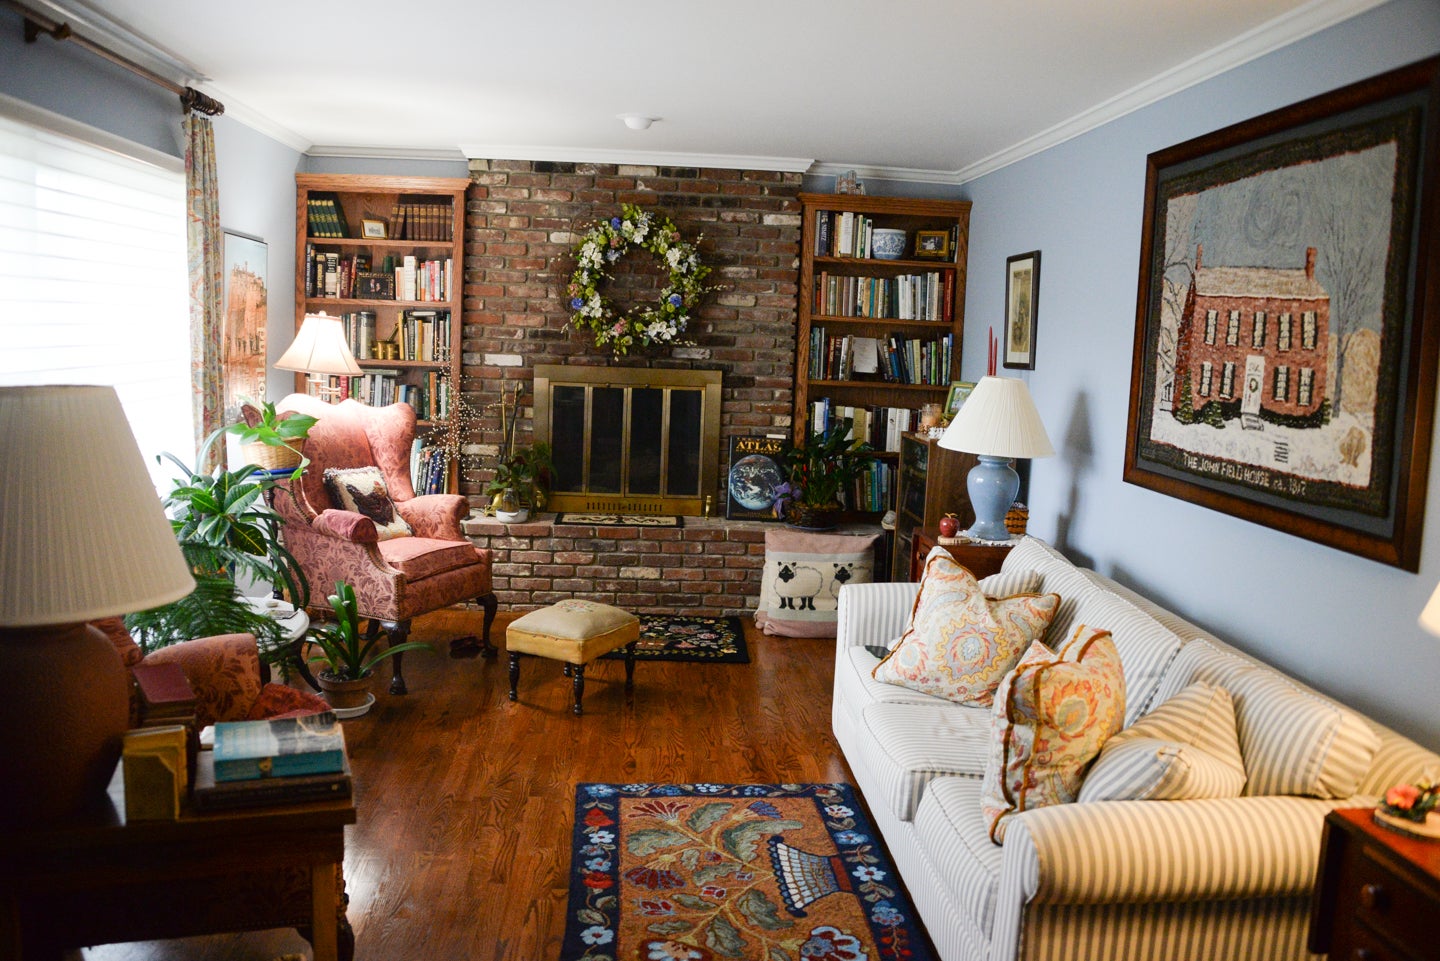 Detail oriented: Passions on display at John and Marcia Walker’s home